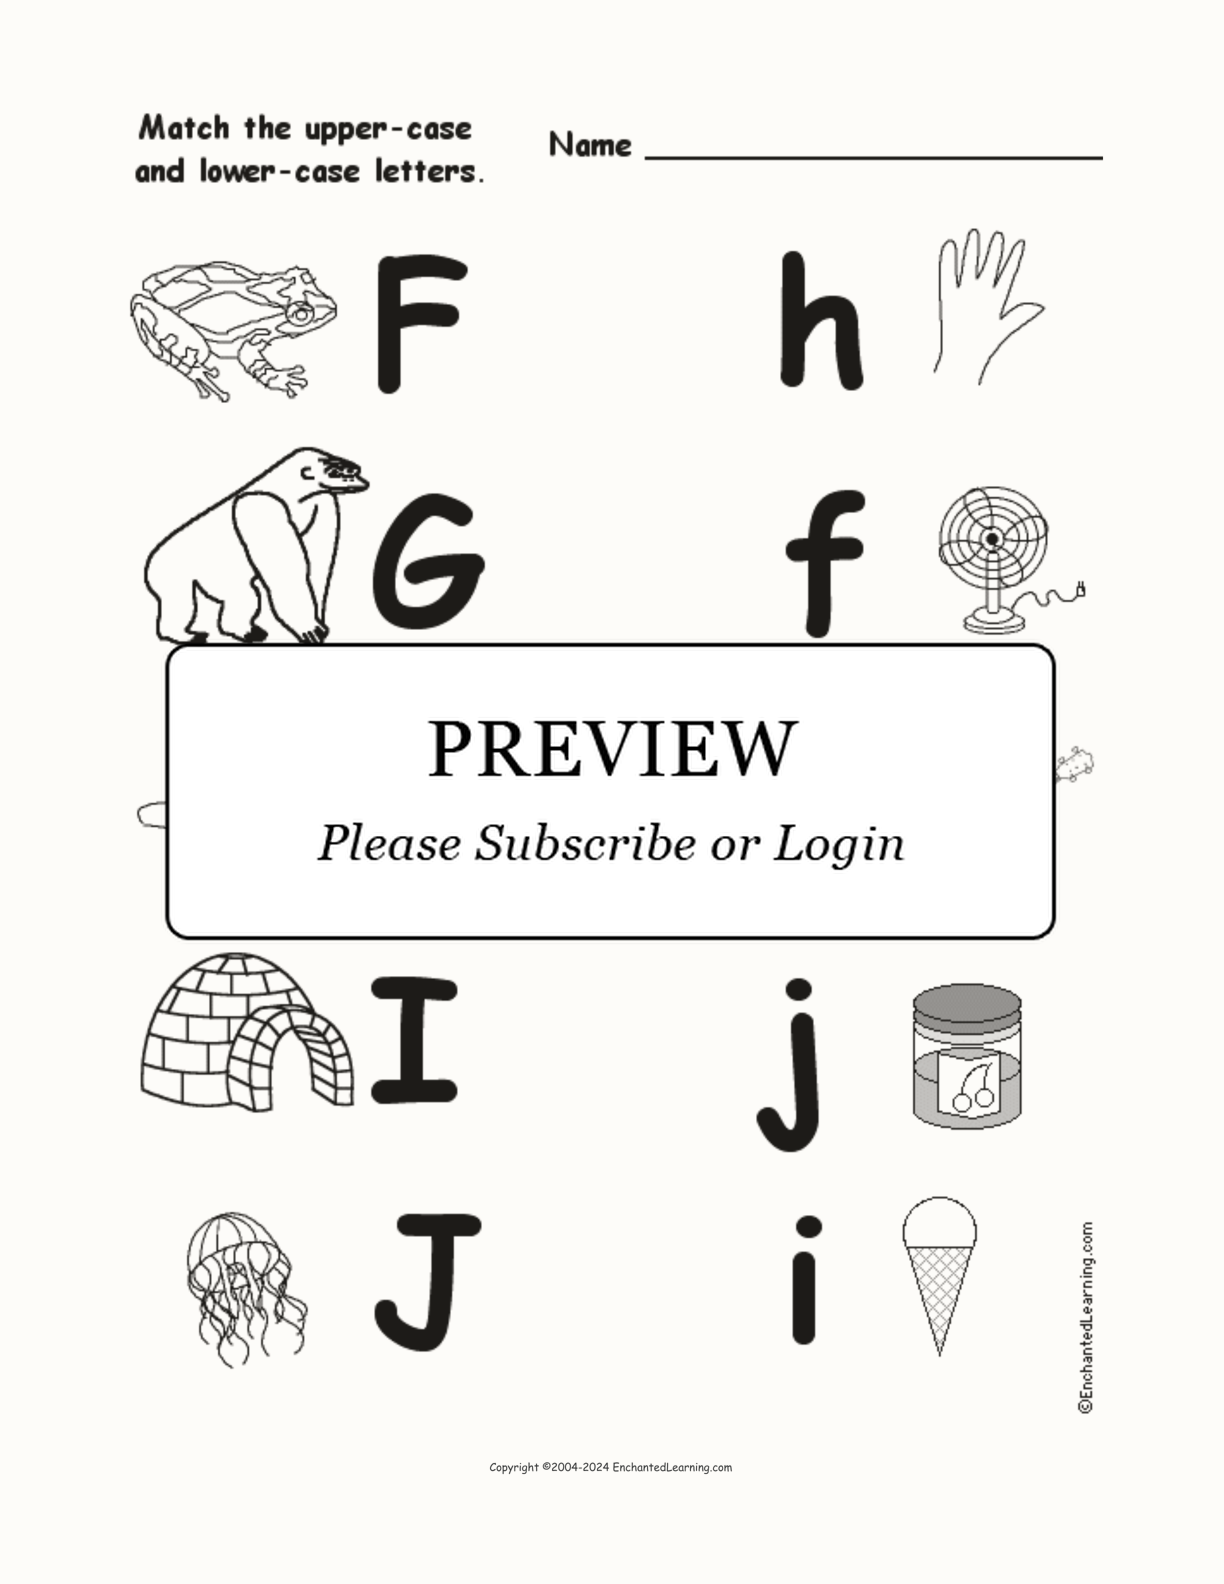 Match Uppercase and Lowercase Letters F-J interactive worksheet page 1